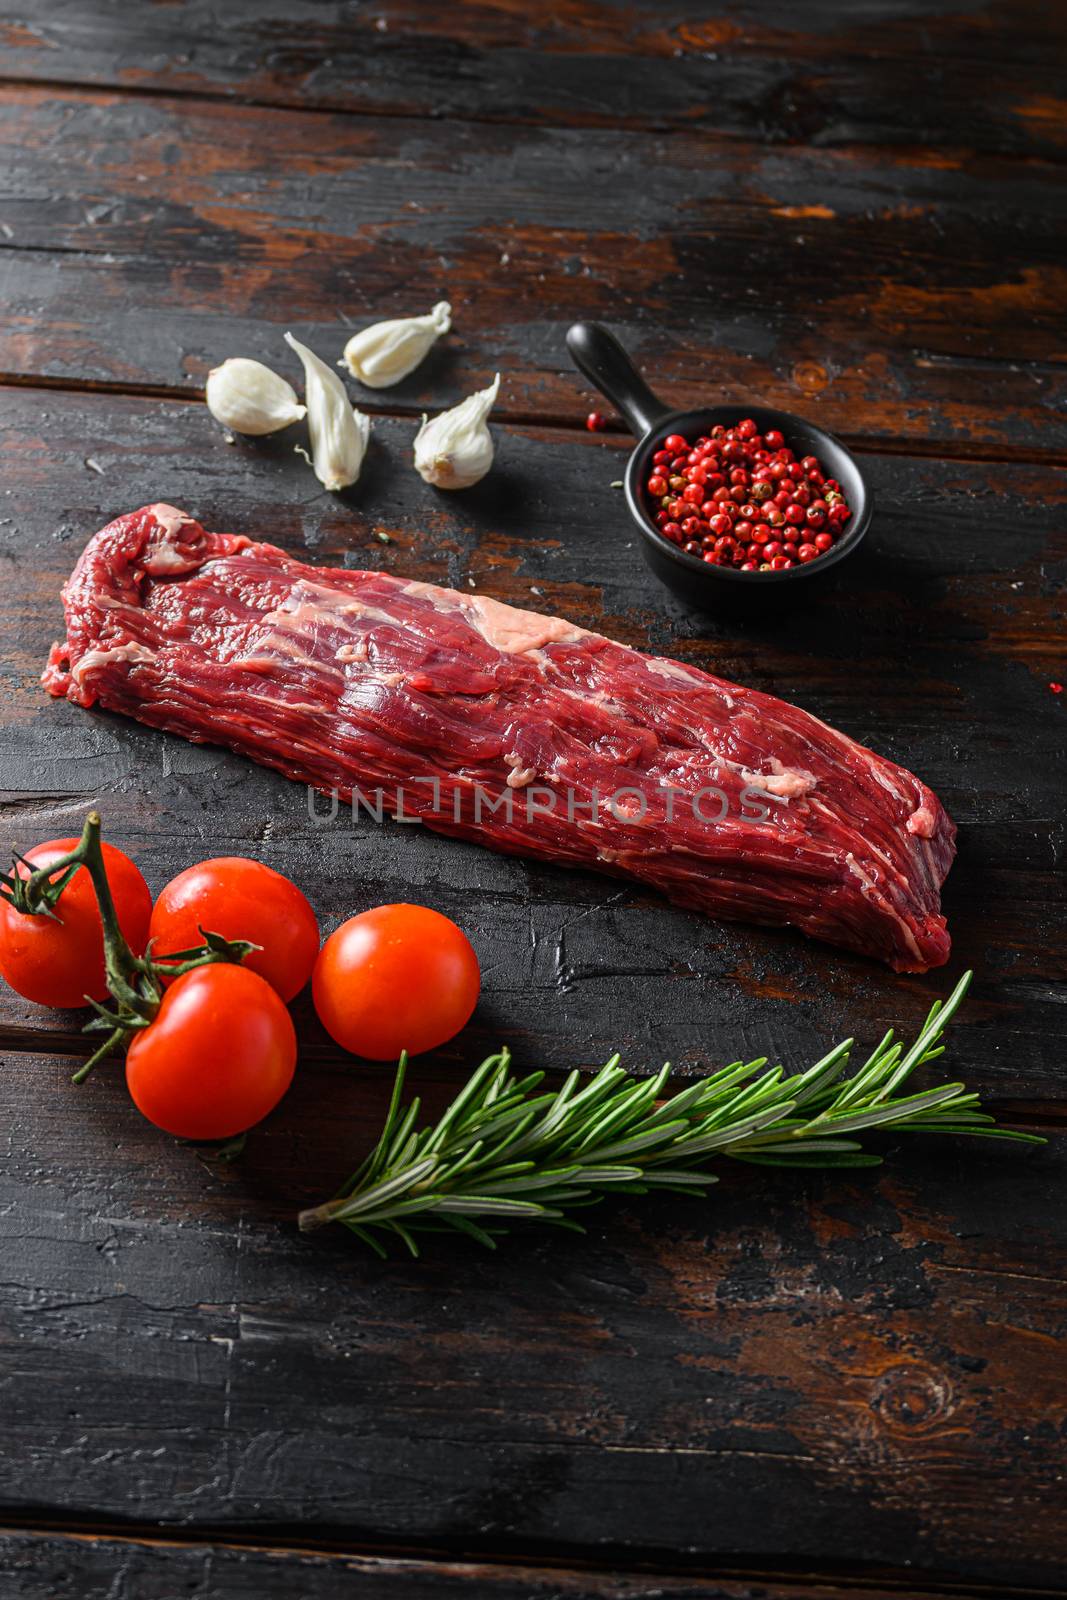 Machete steak raw cut or hanging tende cut, with rosemary over wood background Top side view.